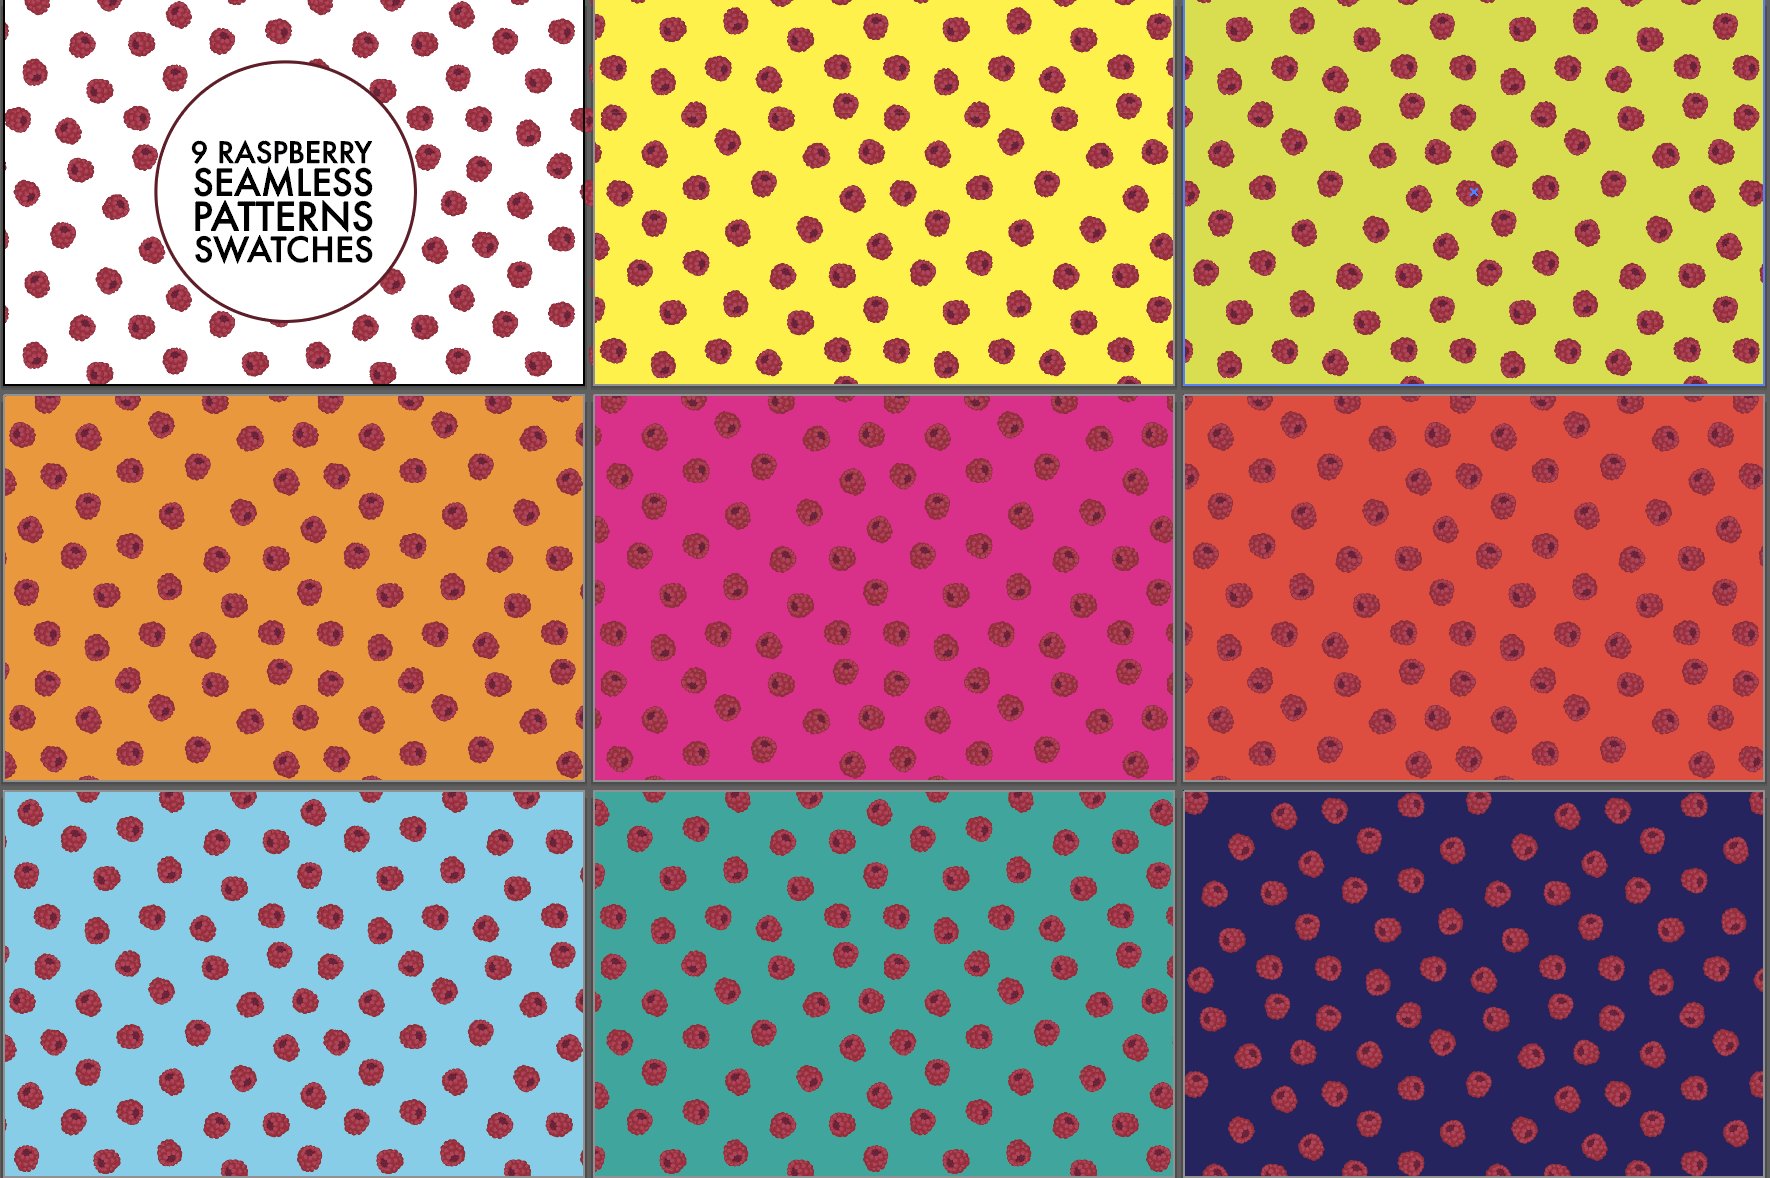 9 Raspberry seamless pattern swatche preview image.